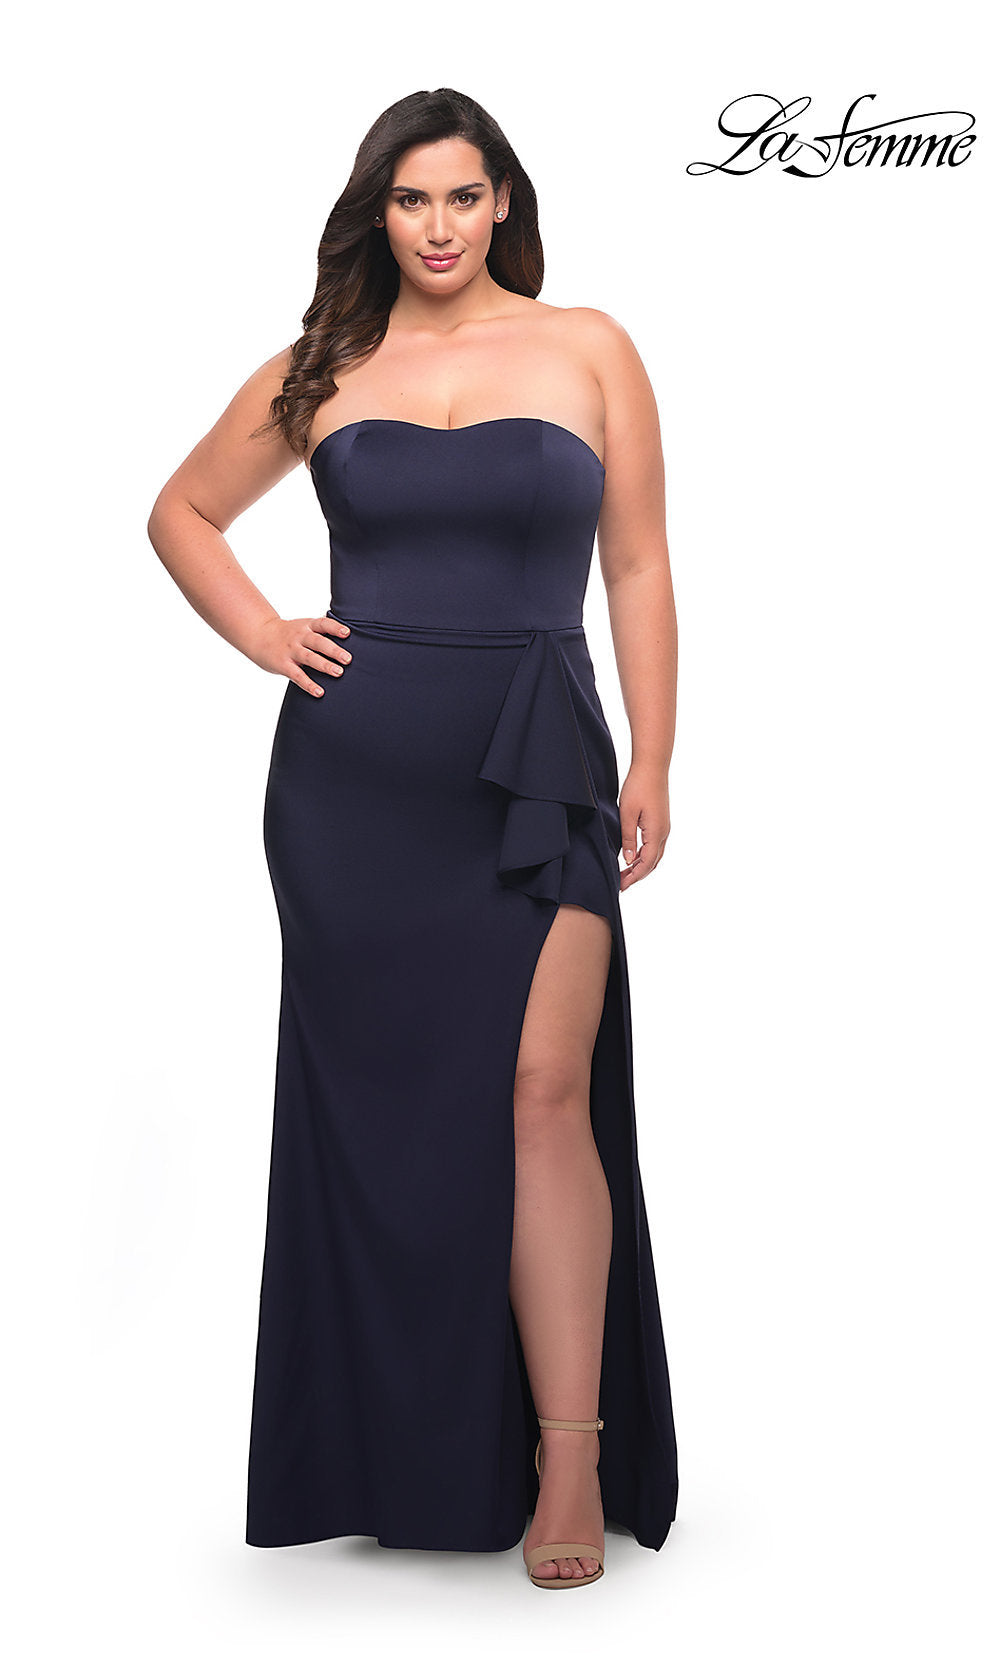 Get Your Plus Size Formal Dresses & Gowns Now and Look Fabulous! – The Dress  Outlet